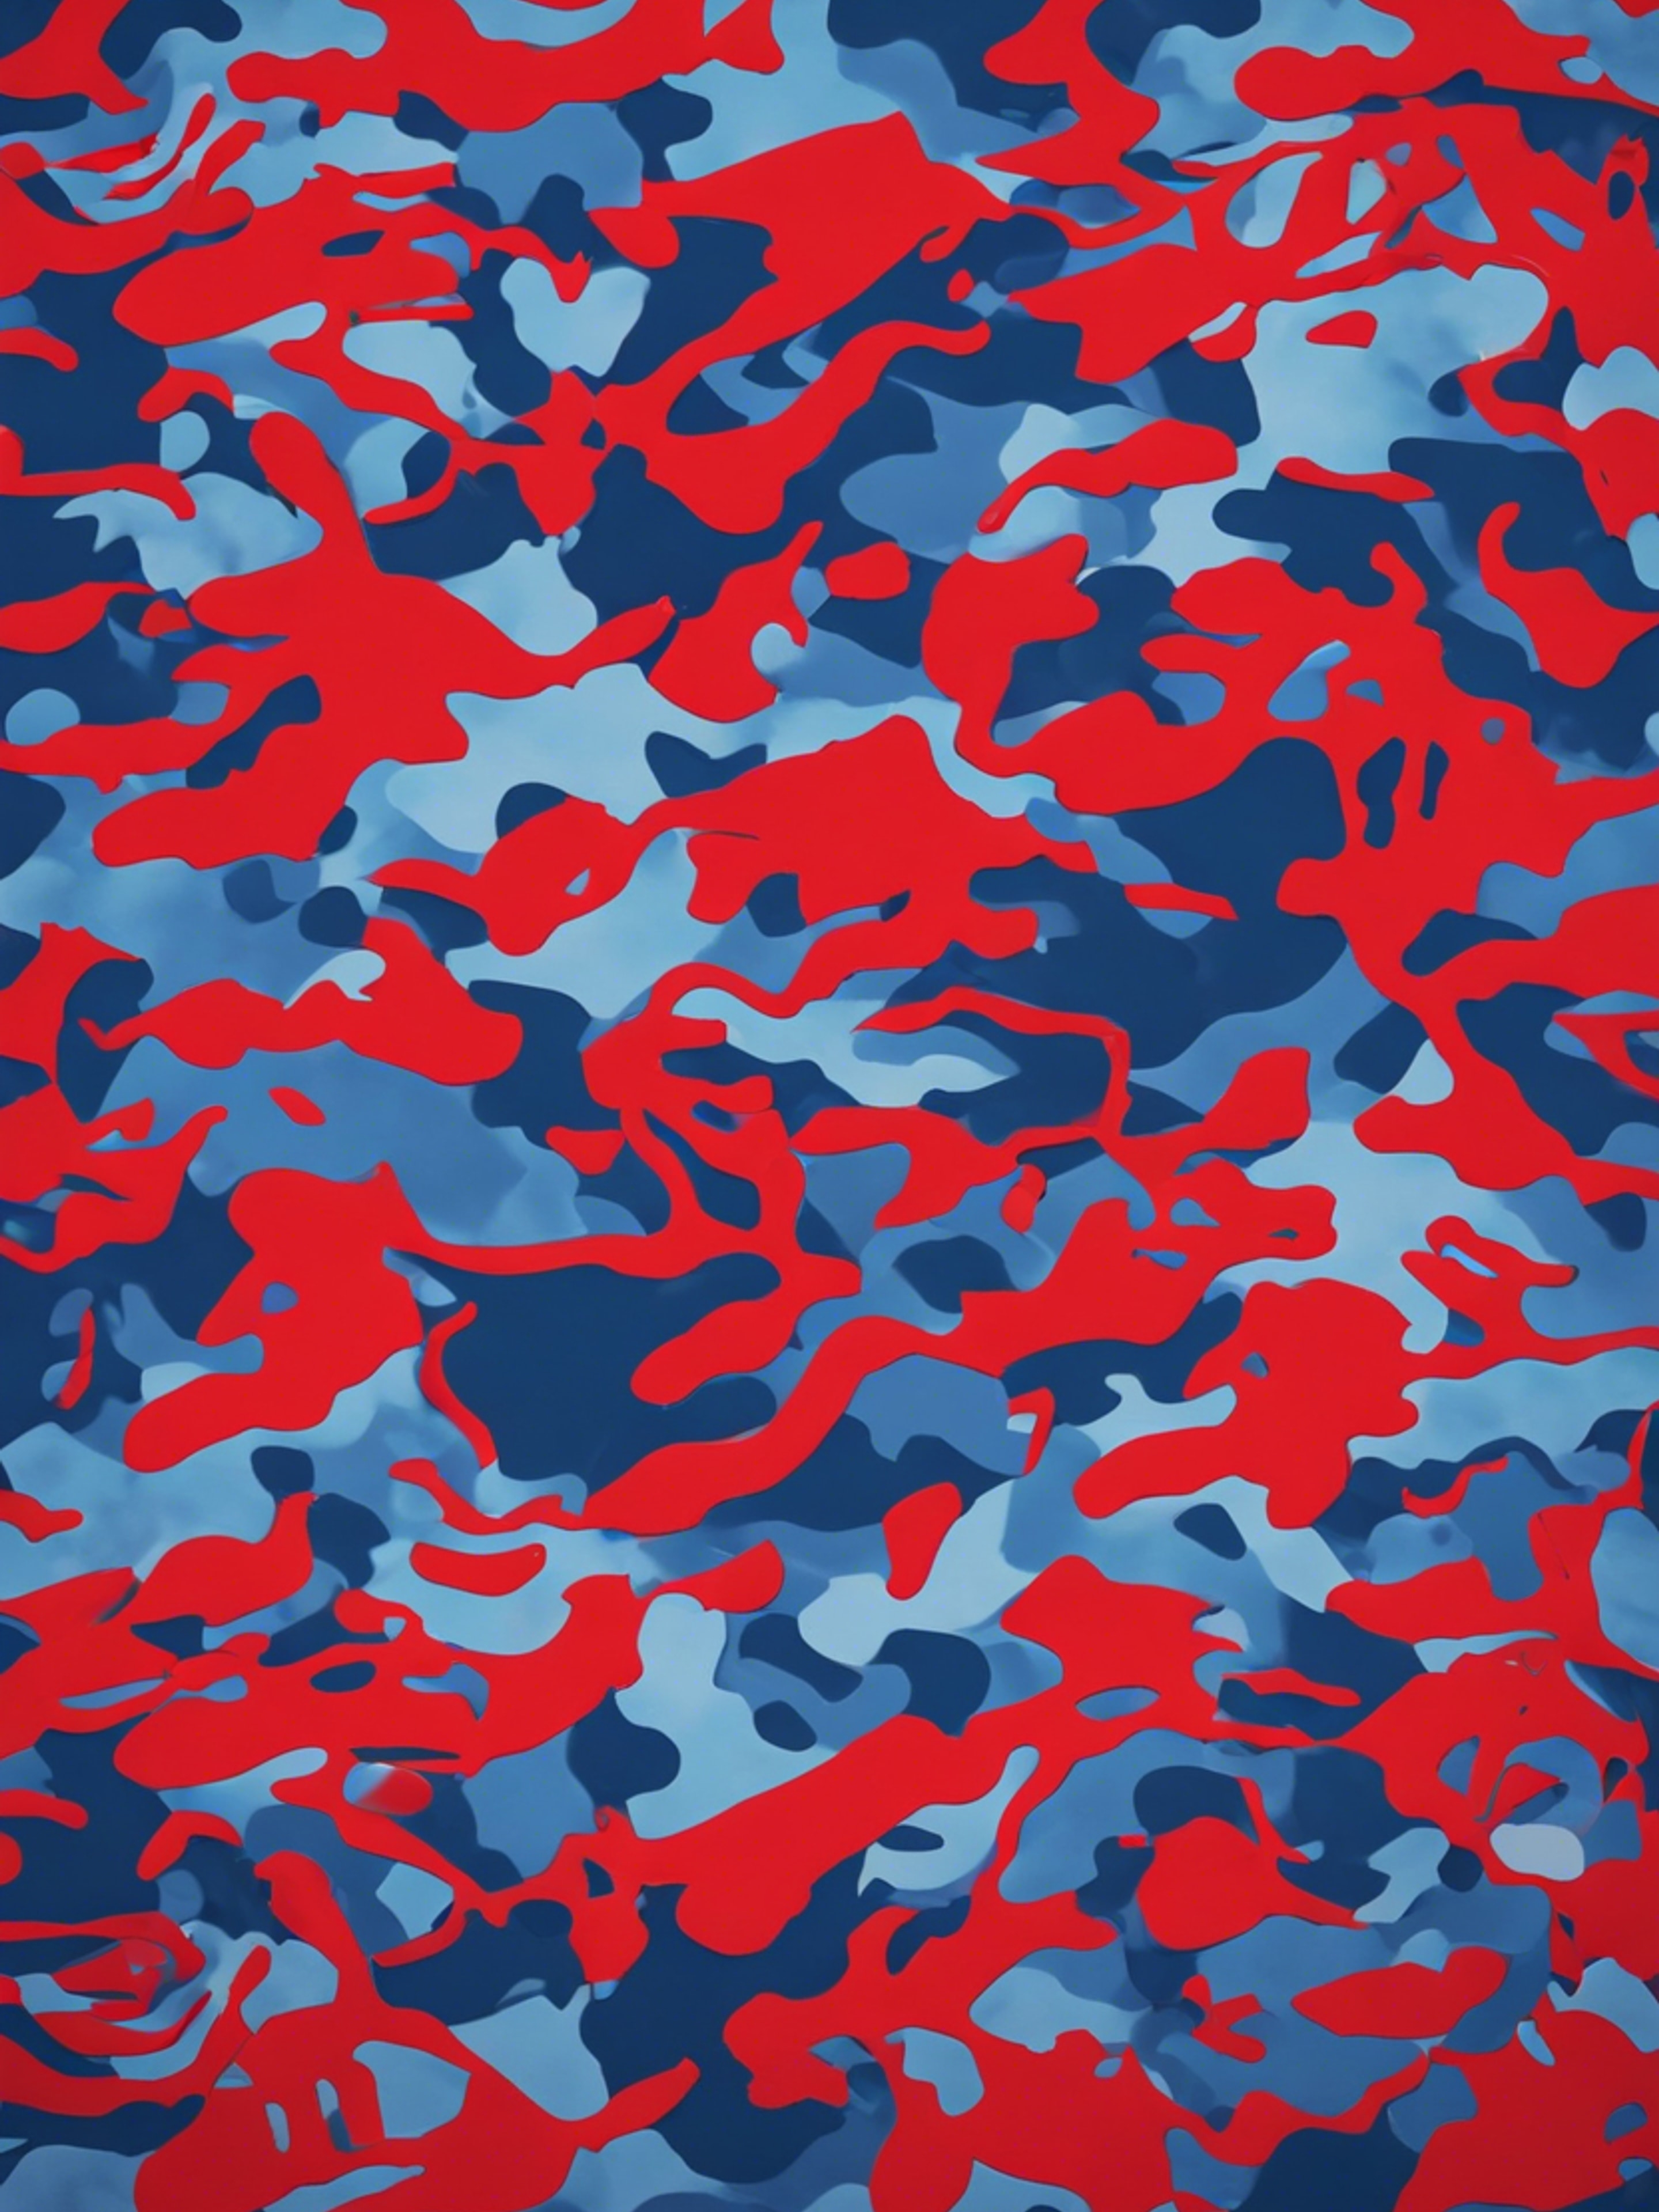 Vintage styled red and blue camouflage pattern. Papel de parede[fee228e6ab6649a28dfc]